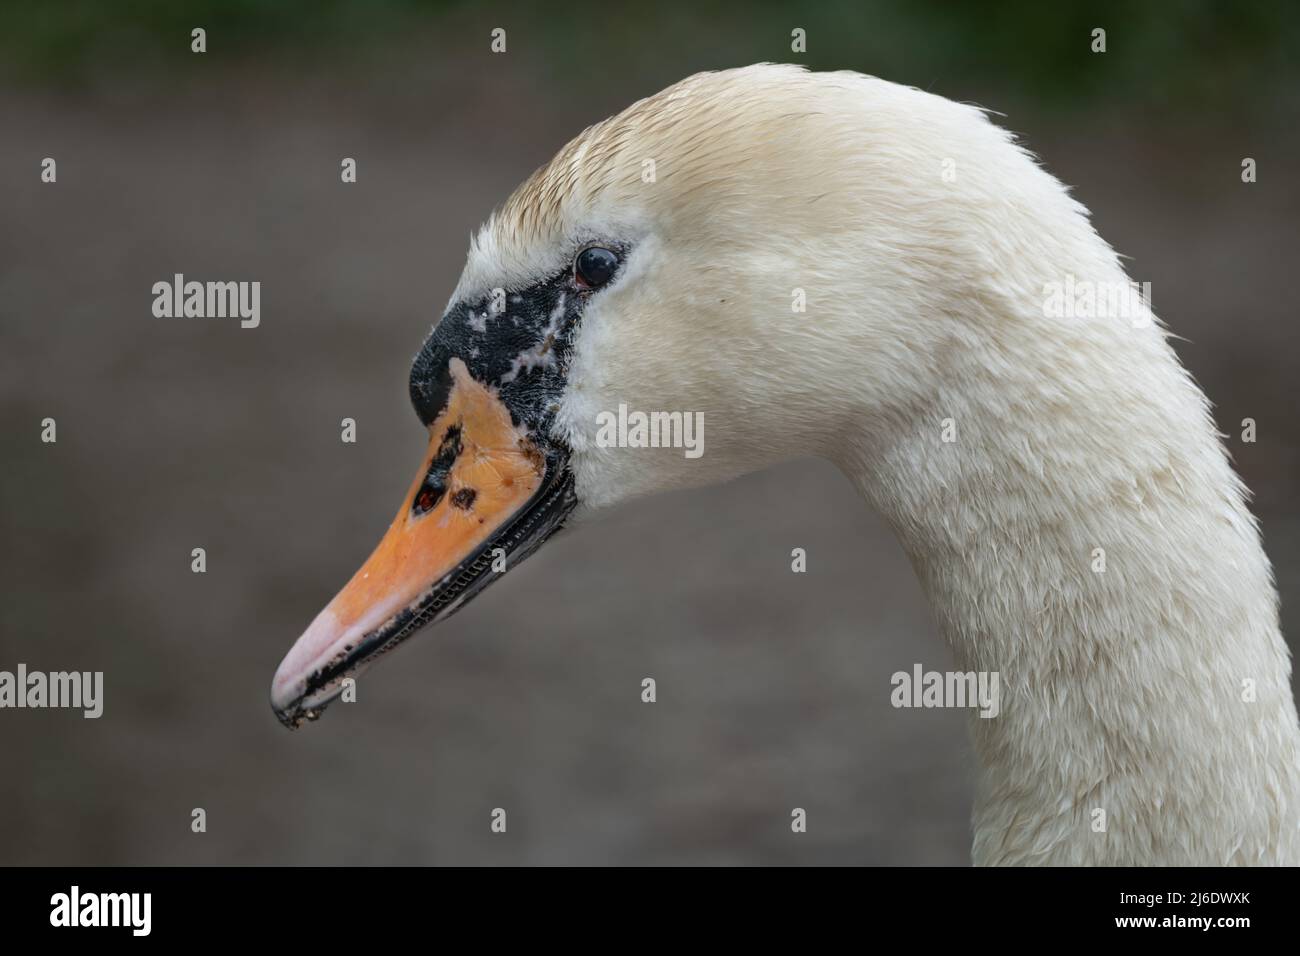 A very close photograph of a mute swan, Cygnus olor, it shows in detail the head and a small part of the neck only Stock Photo